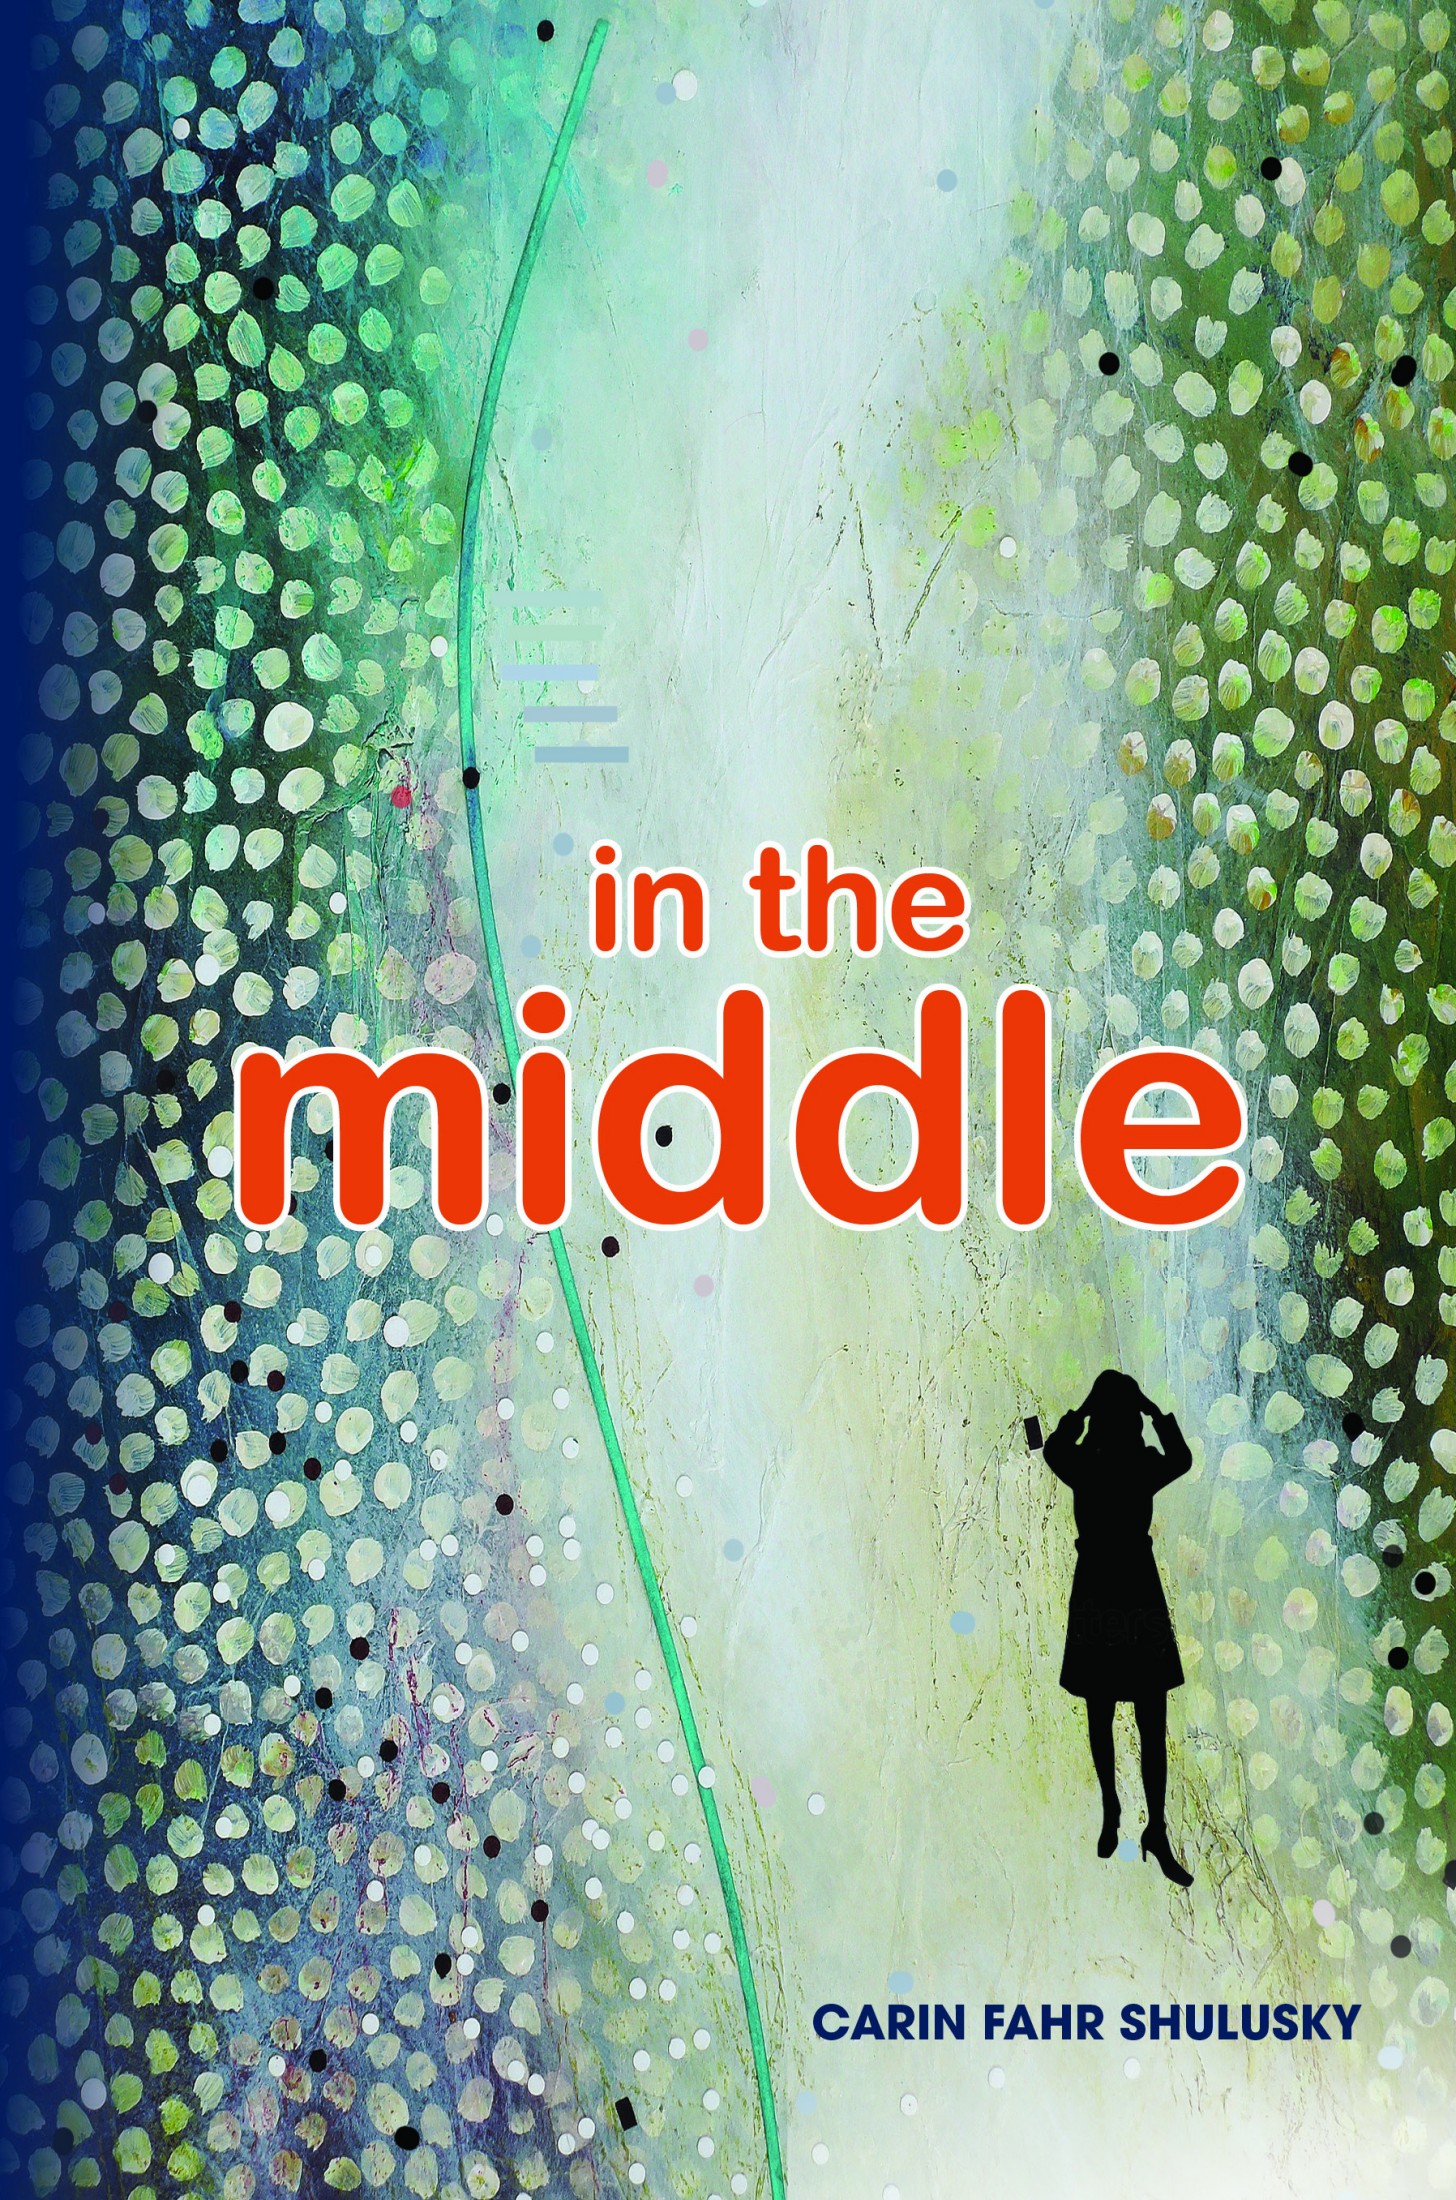 In the Middle by Carin Fahr Shulusky